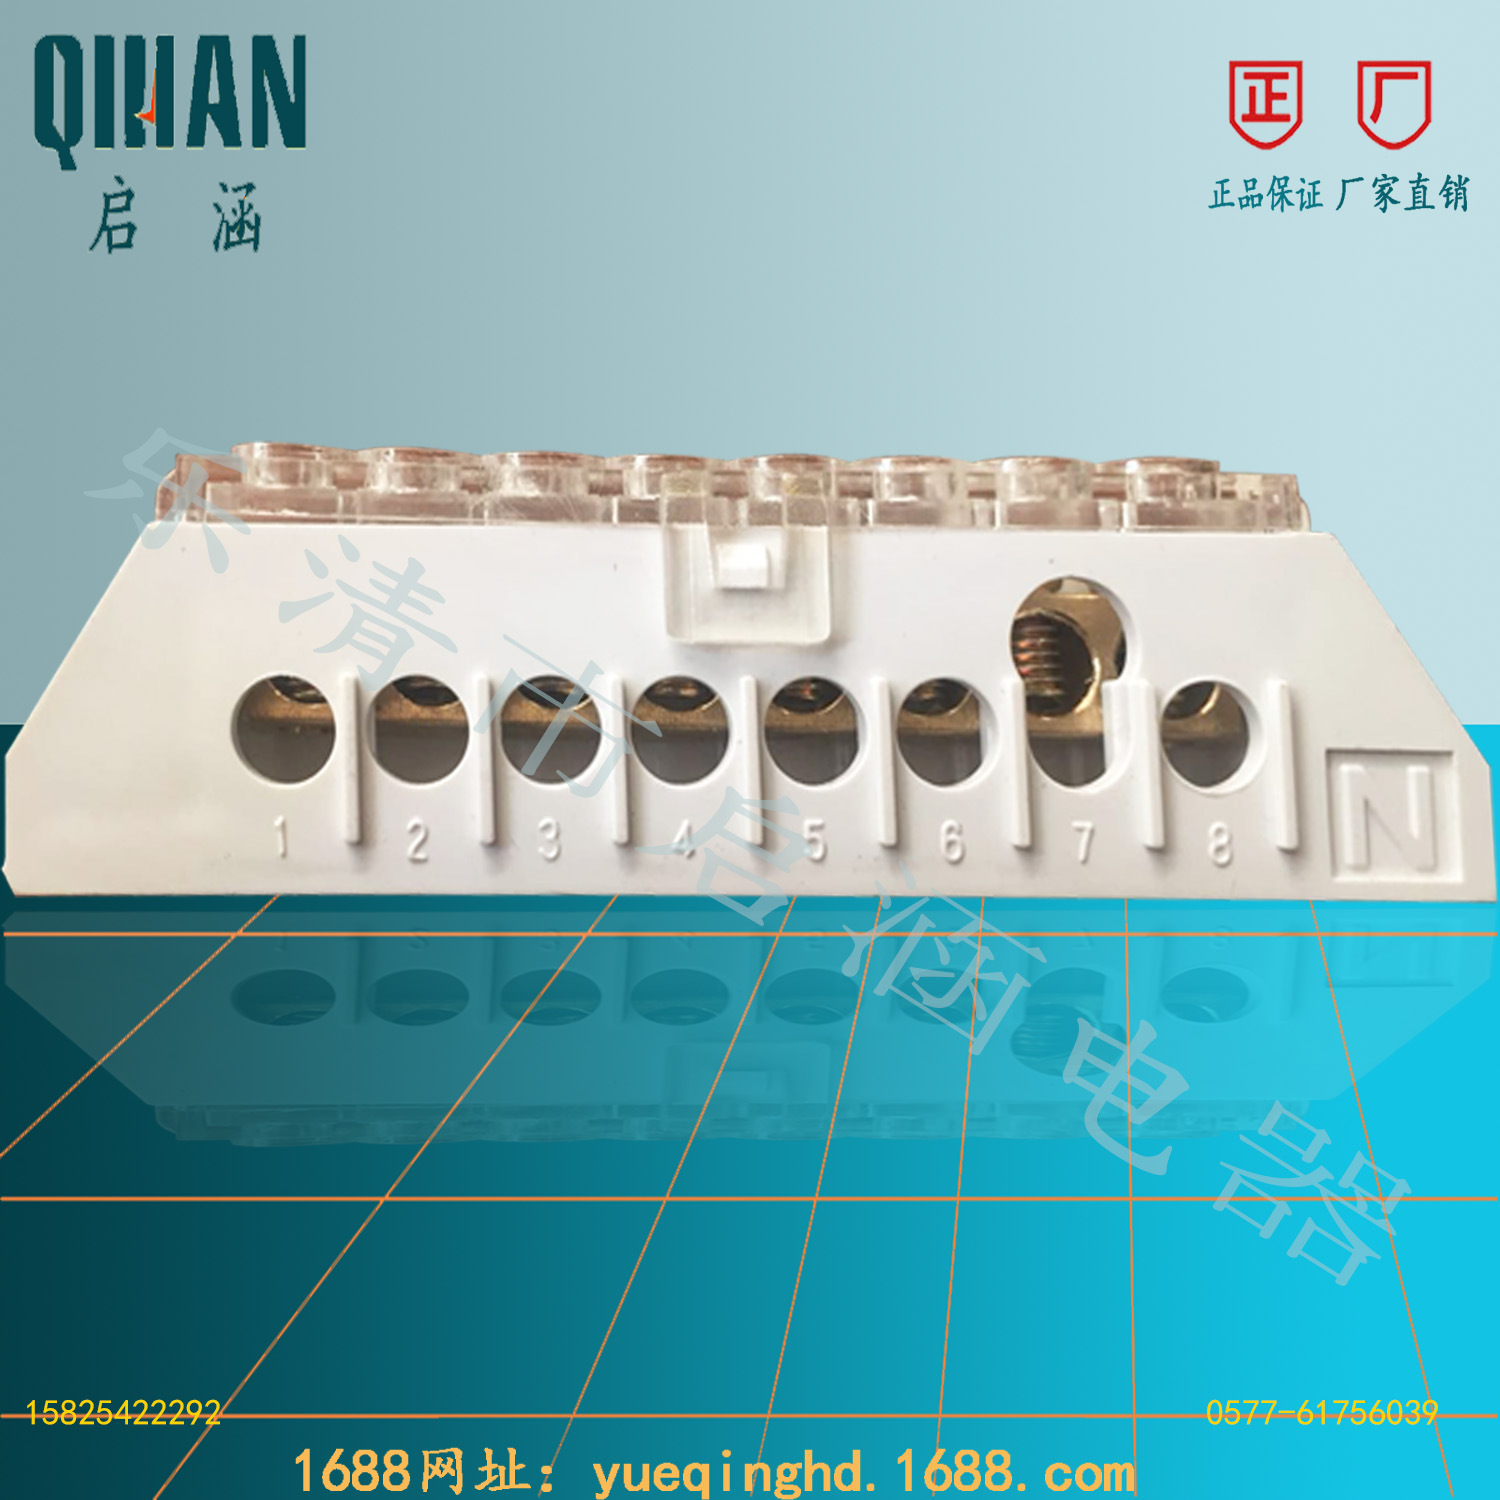 wholesale Copper terminals Terminals Zero to row Distribution box Grounding Connect Copper Lighting box Post